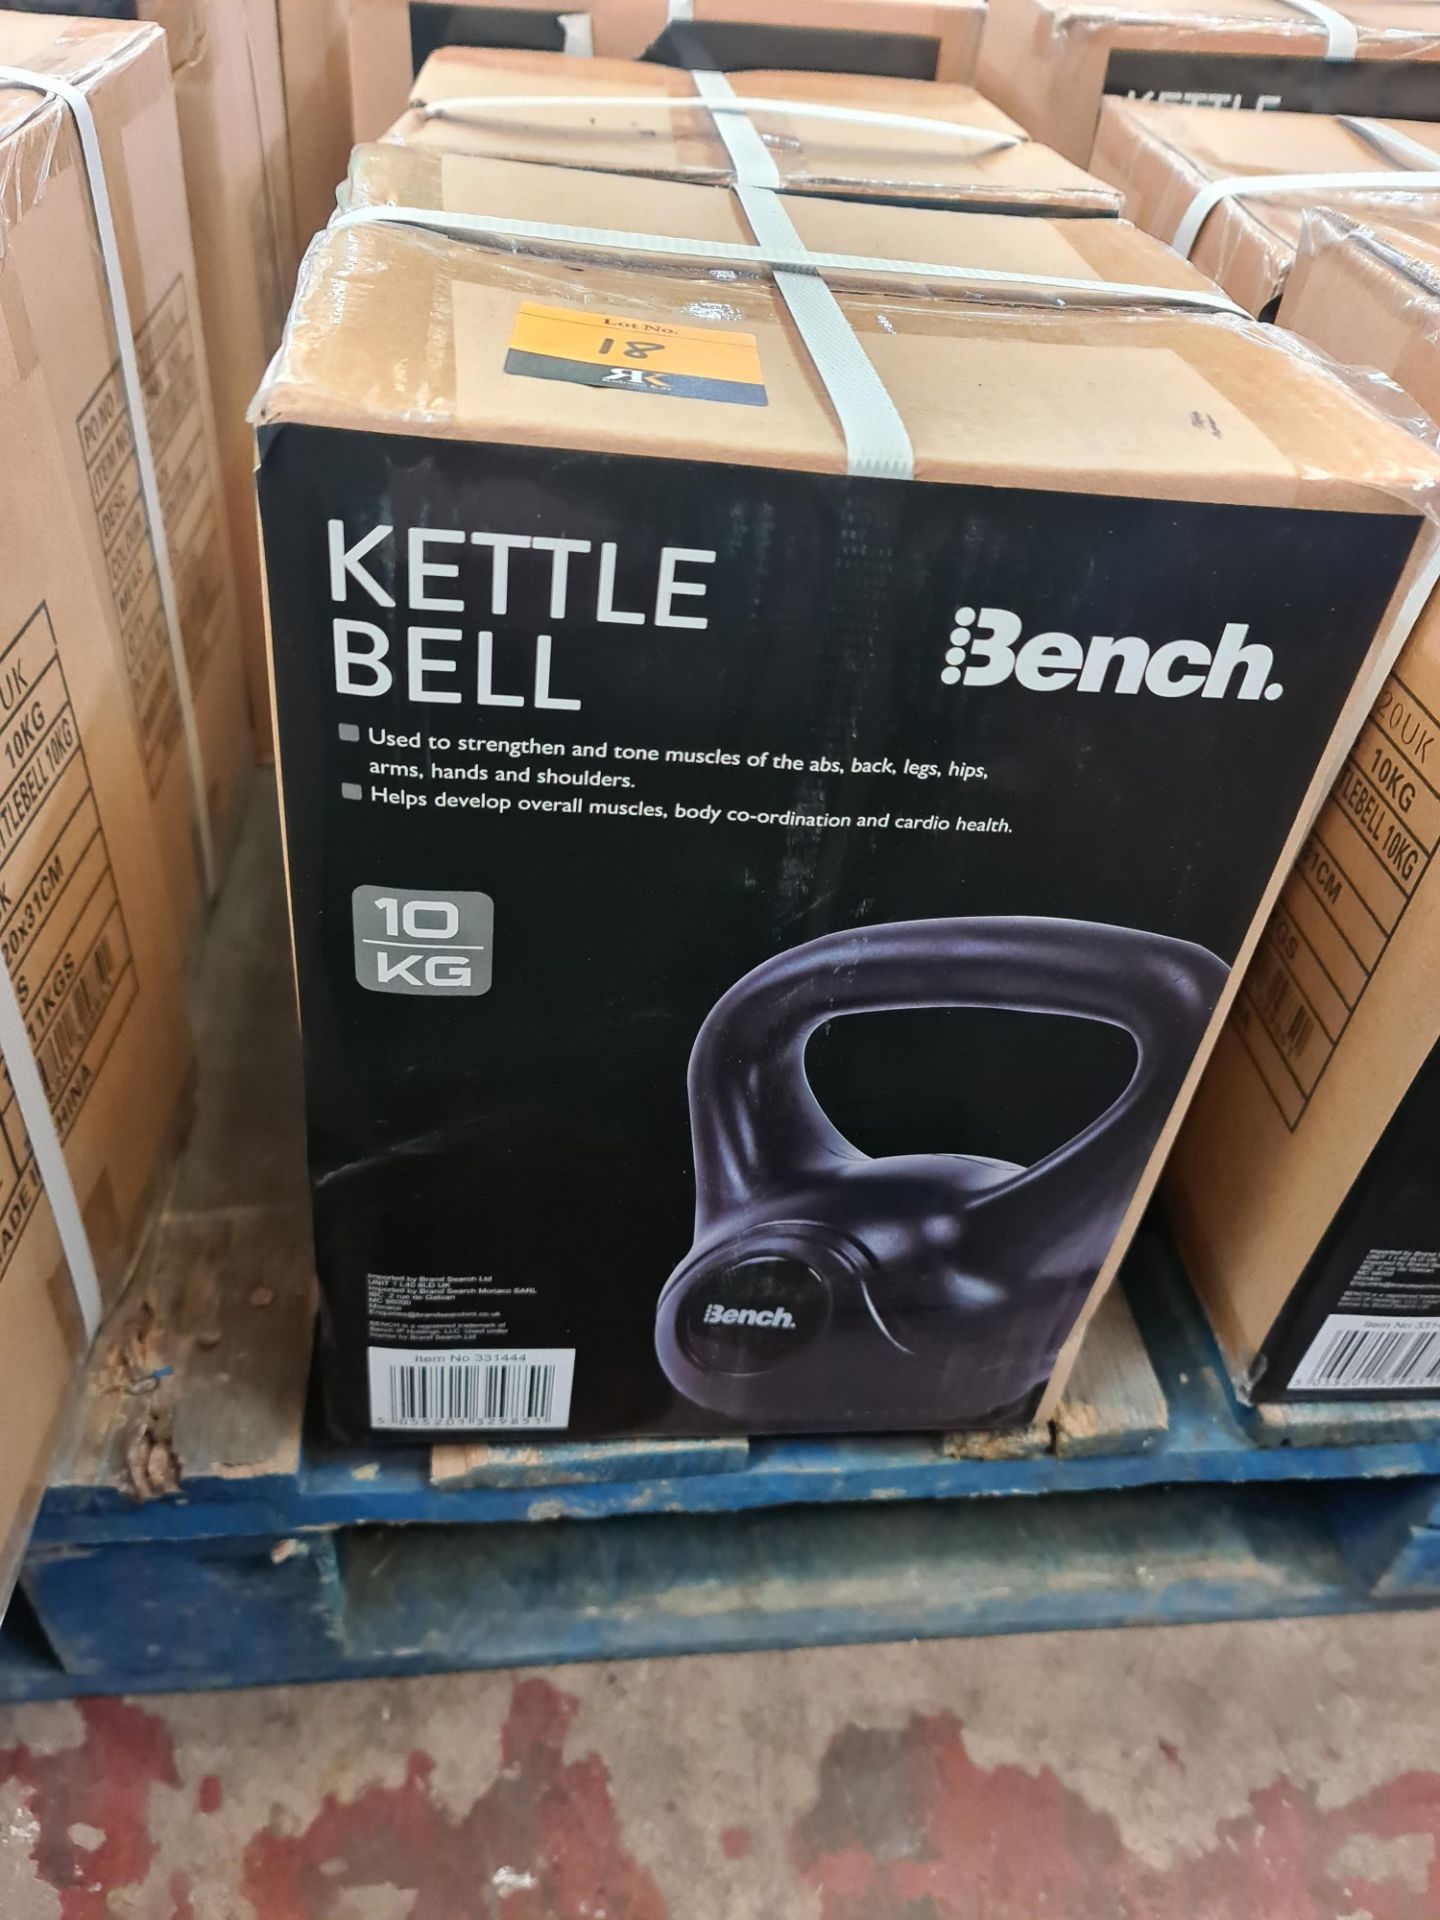 Set of 4 Bench kettle bells, individually boxed, sized 10kg, 12kg, 16kg and 20kg - Image 5 of 5